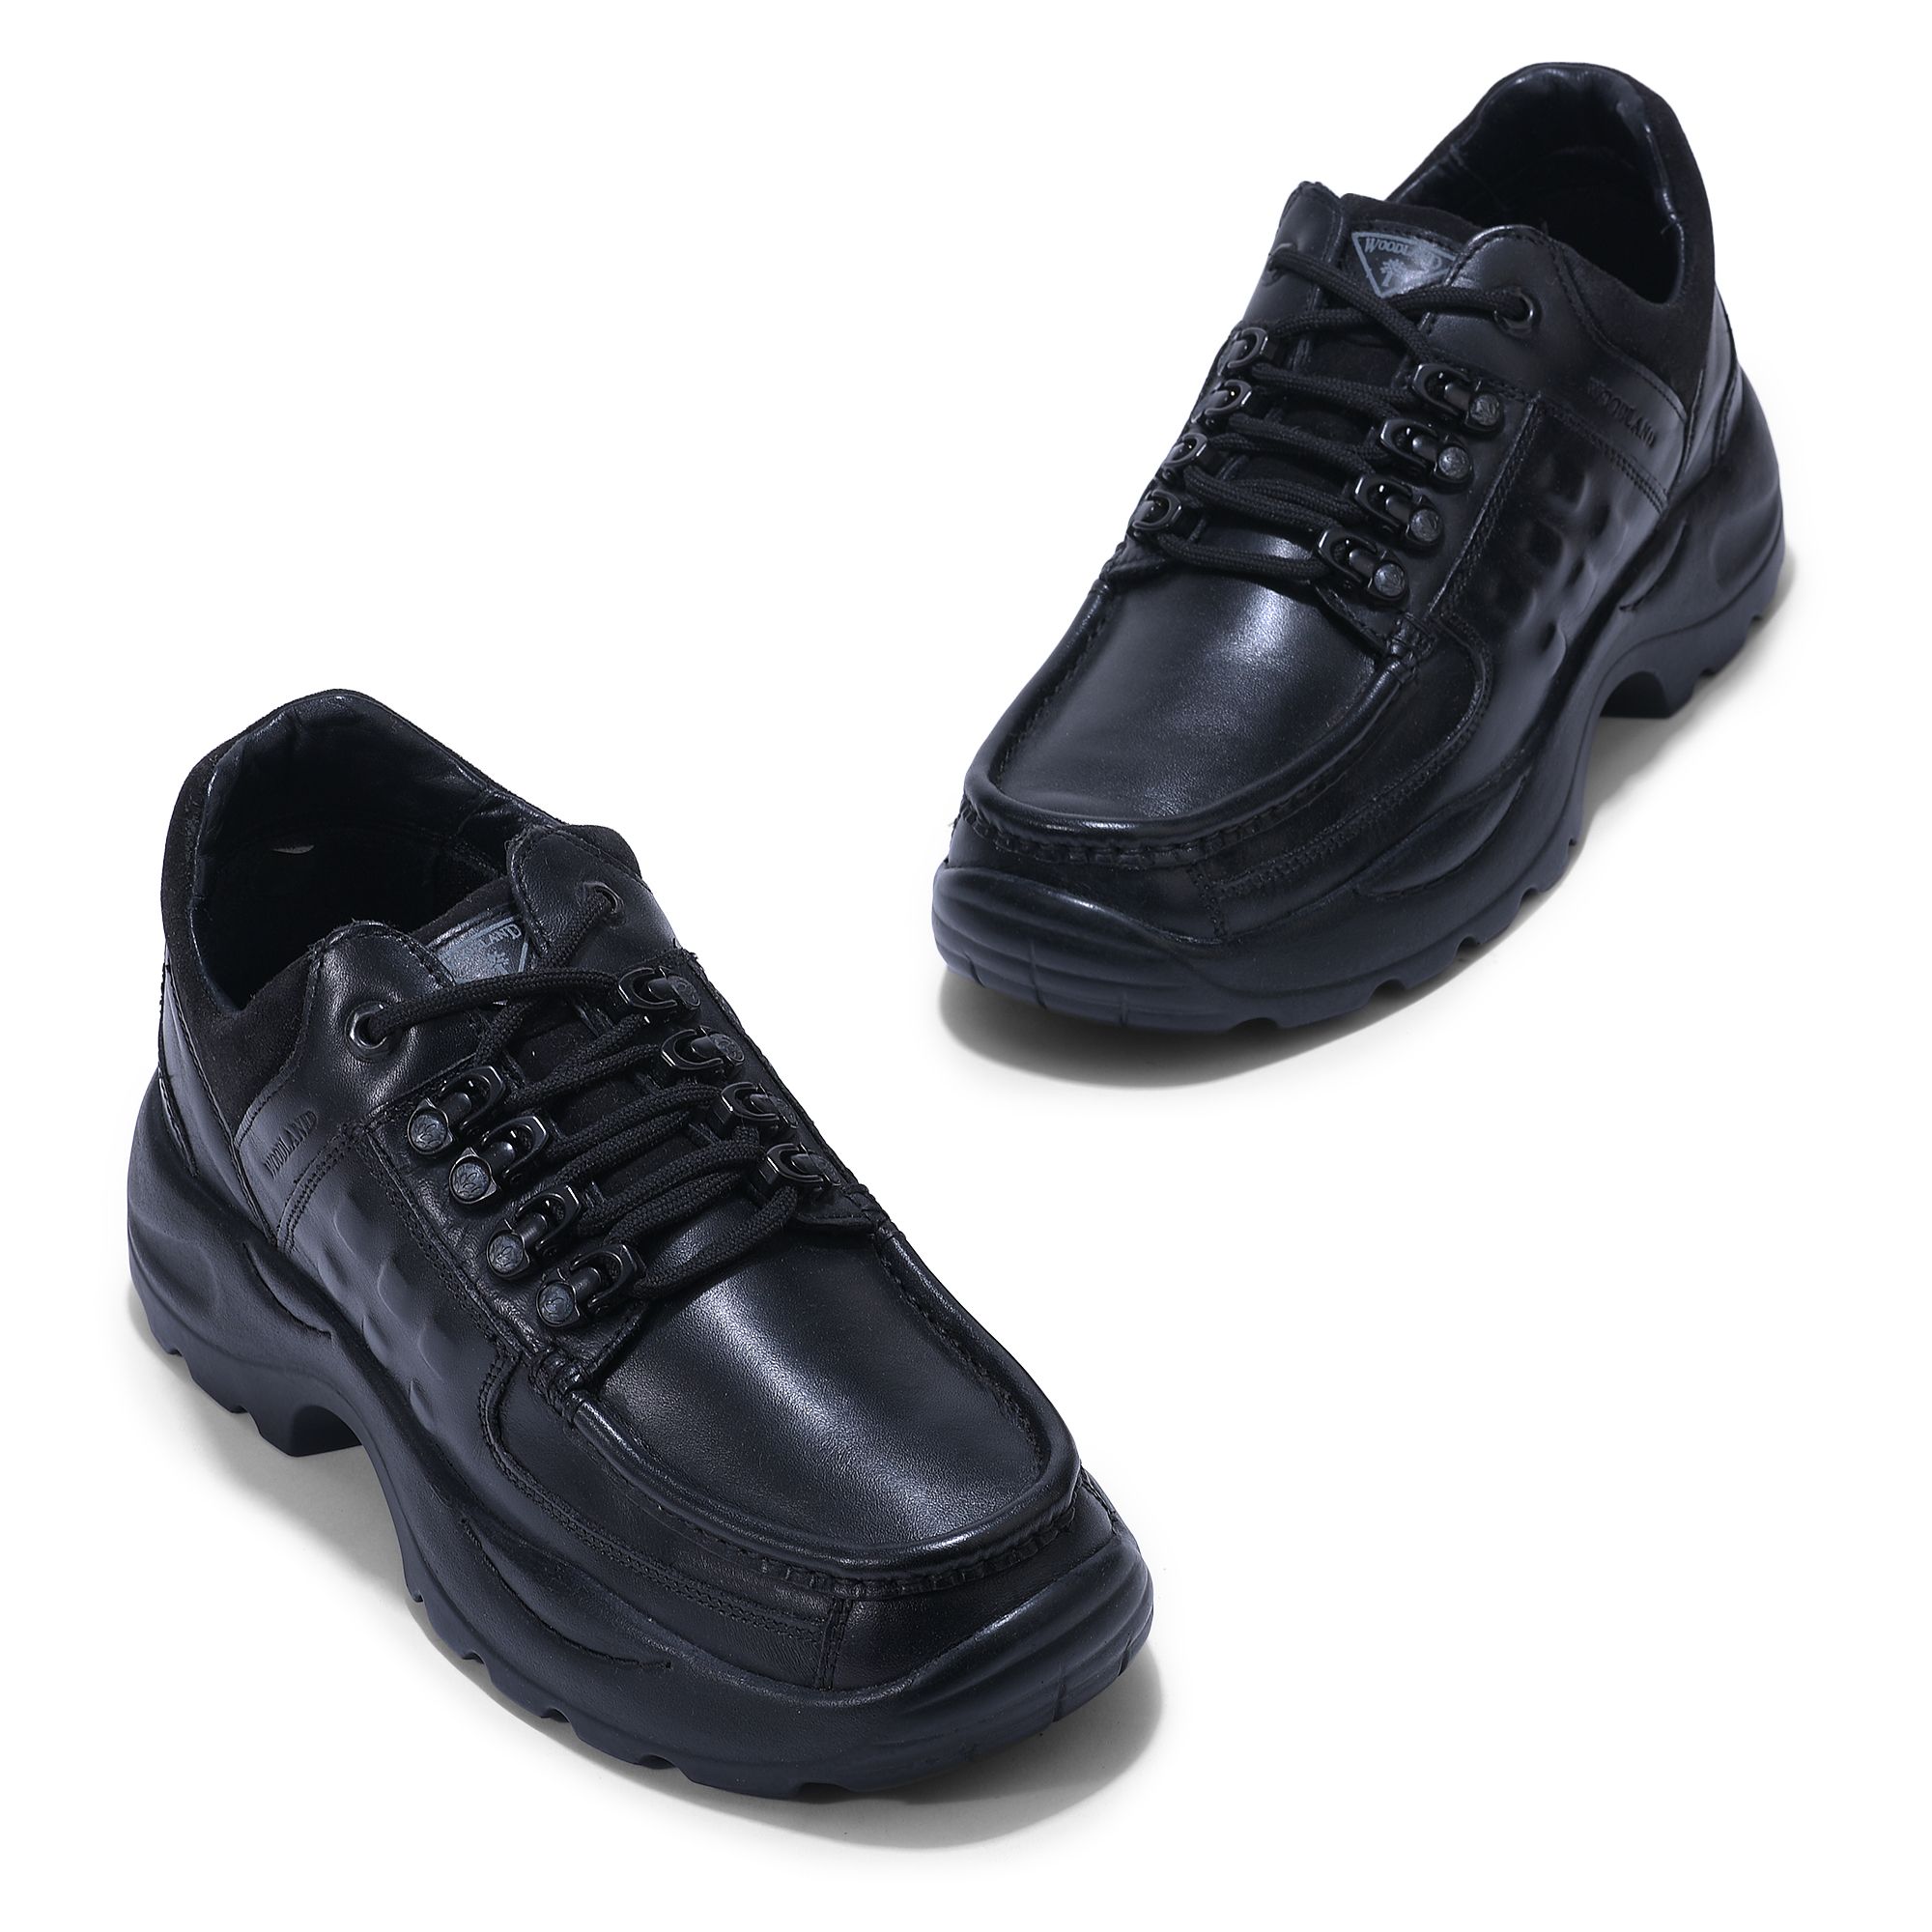 Woodland black casual shoes